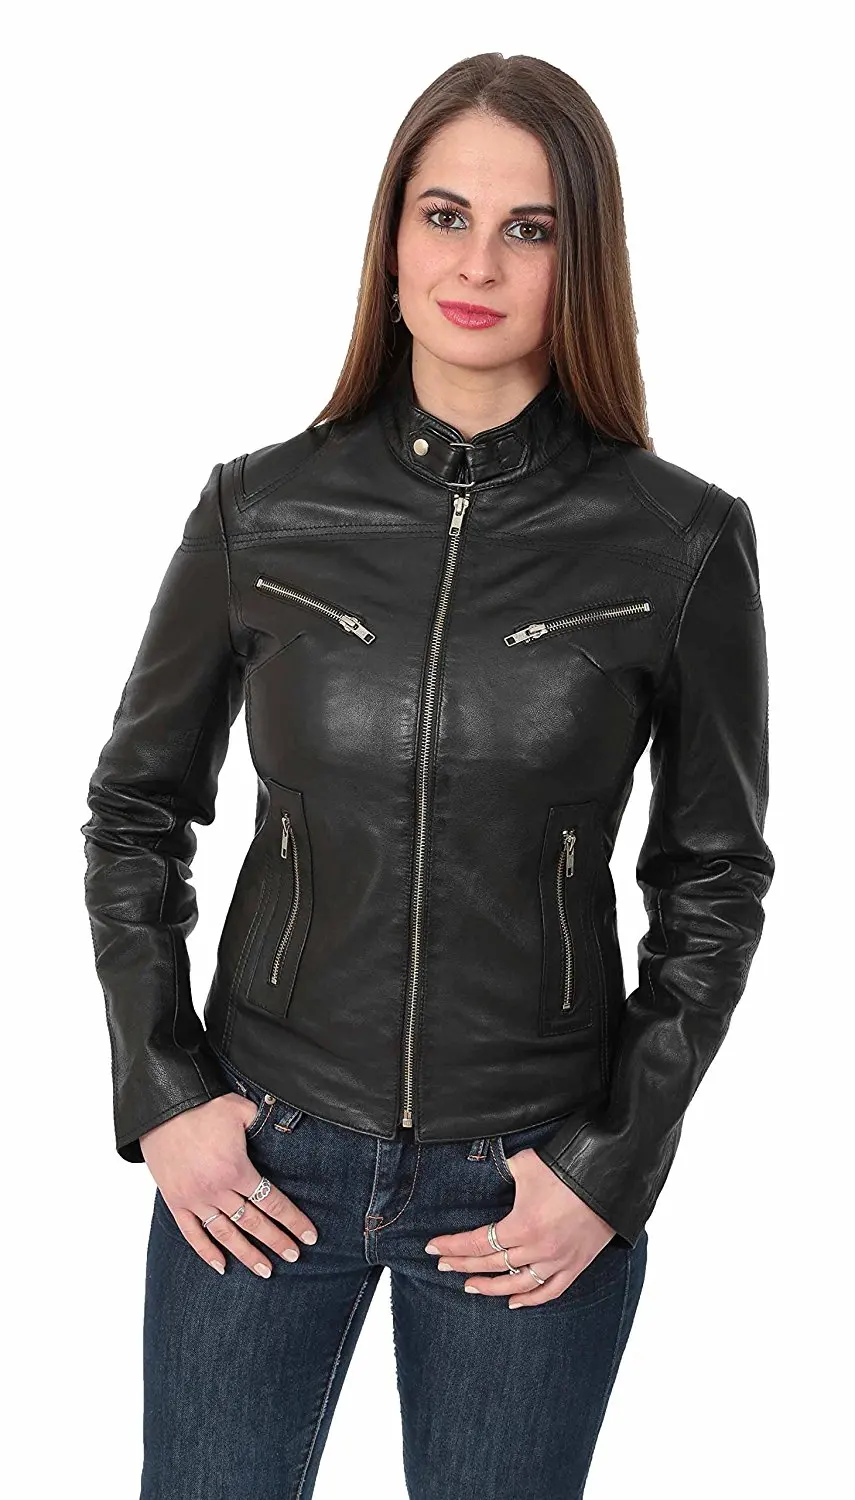 Cheap Fitted Leather Jacket Womens Find Fitted Leather Jacket Womens